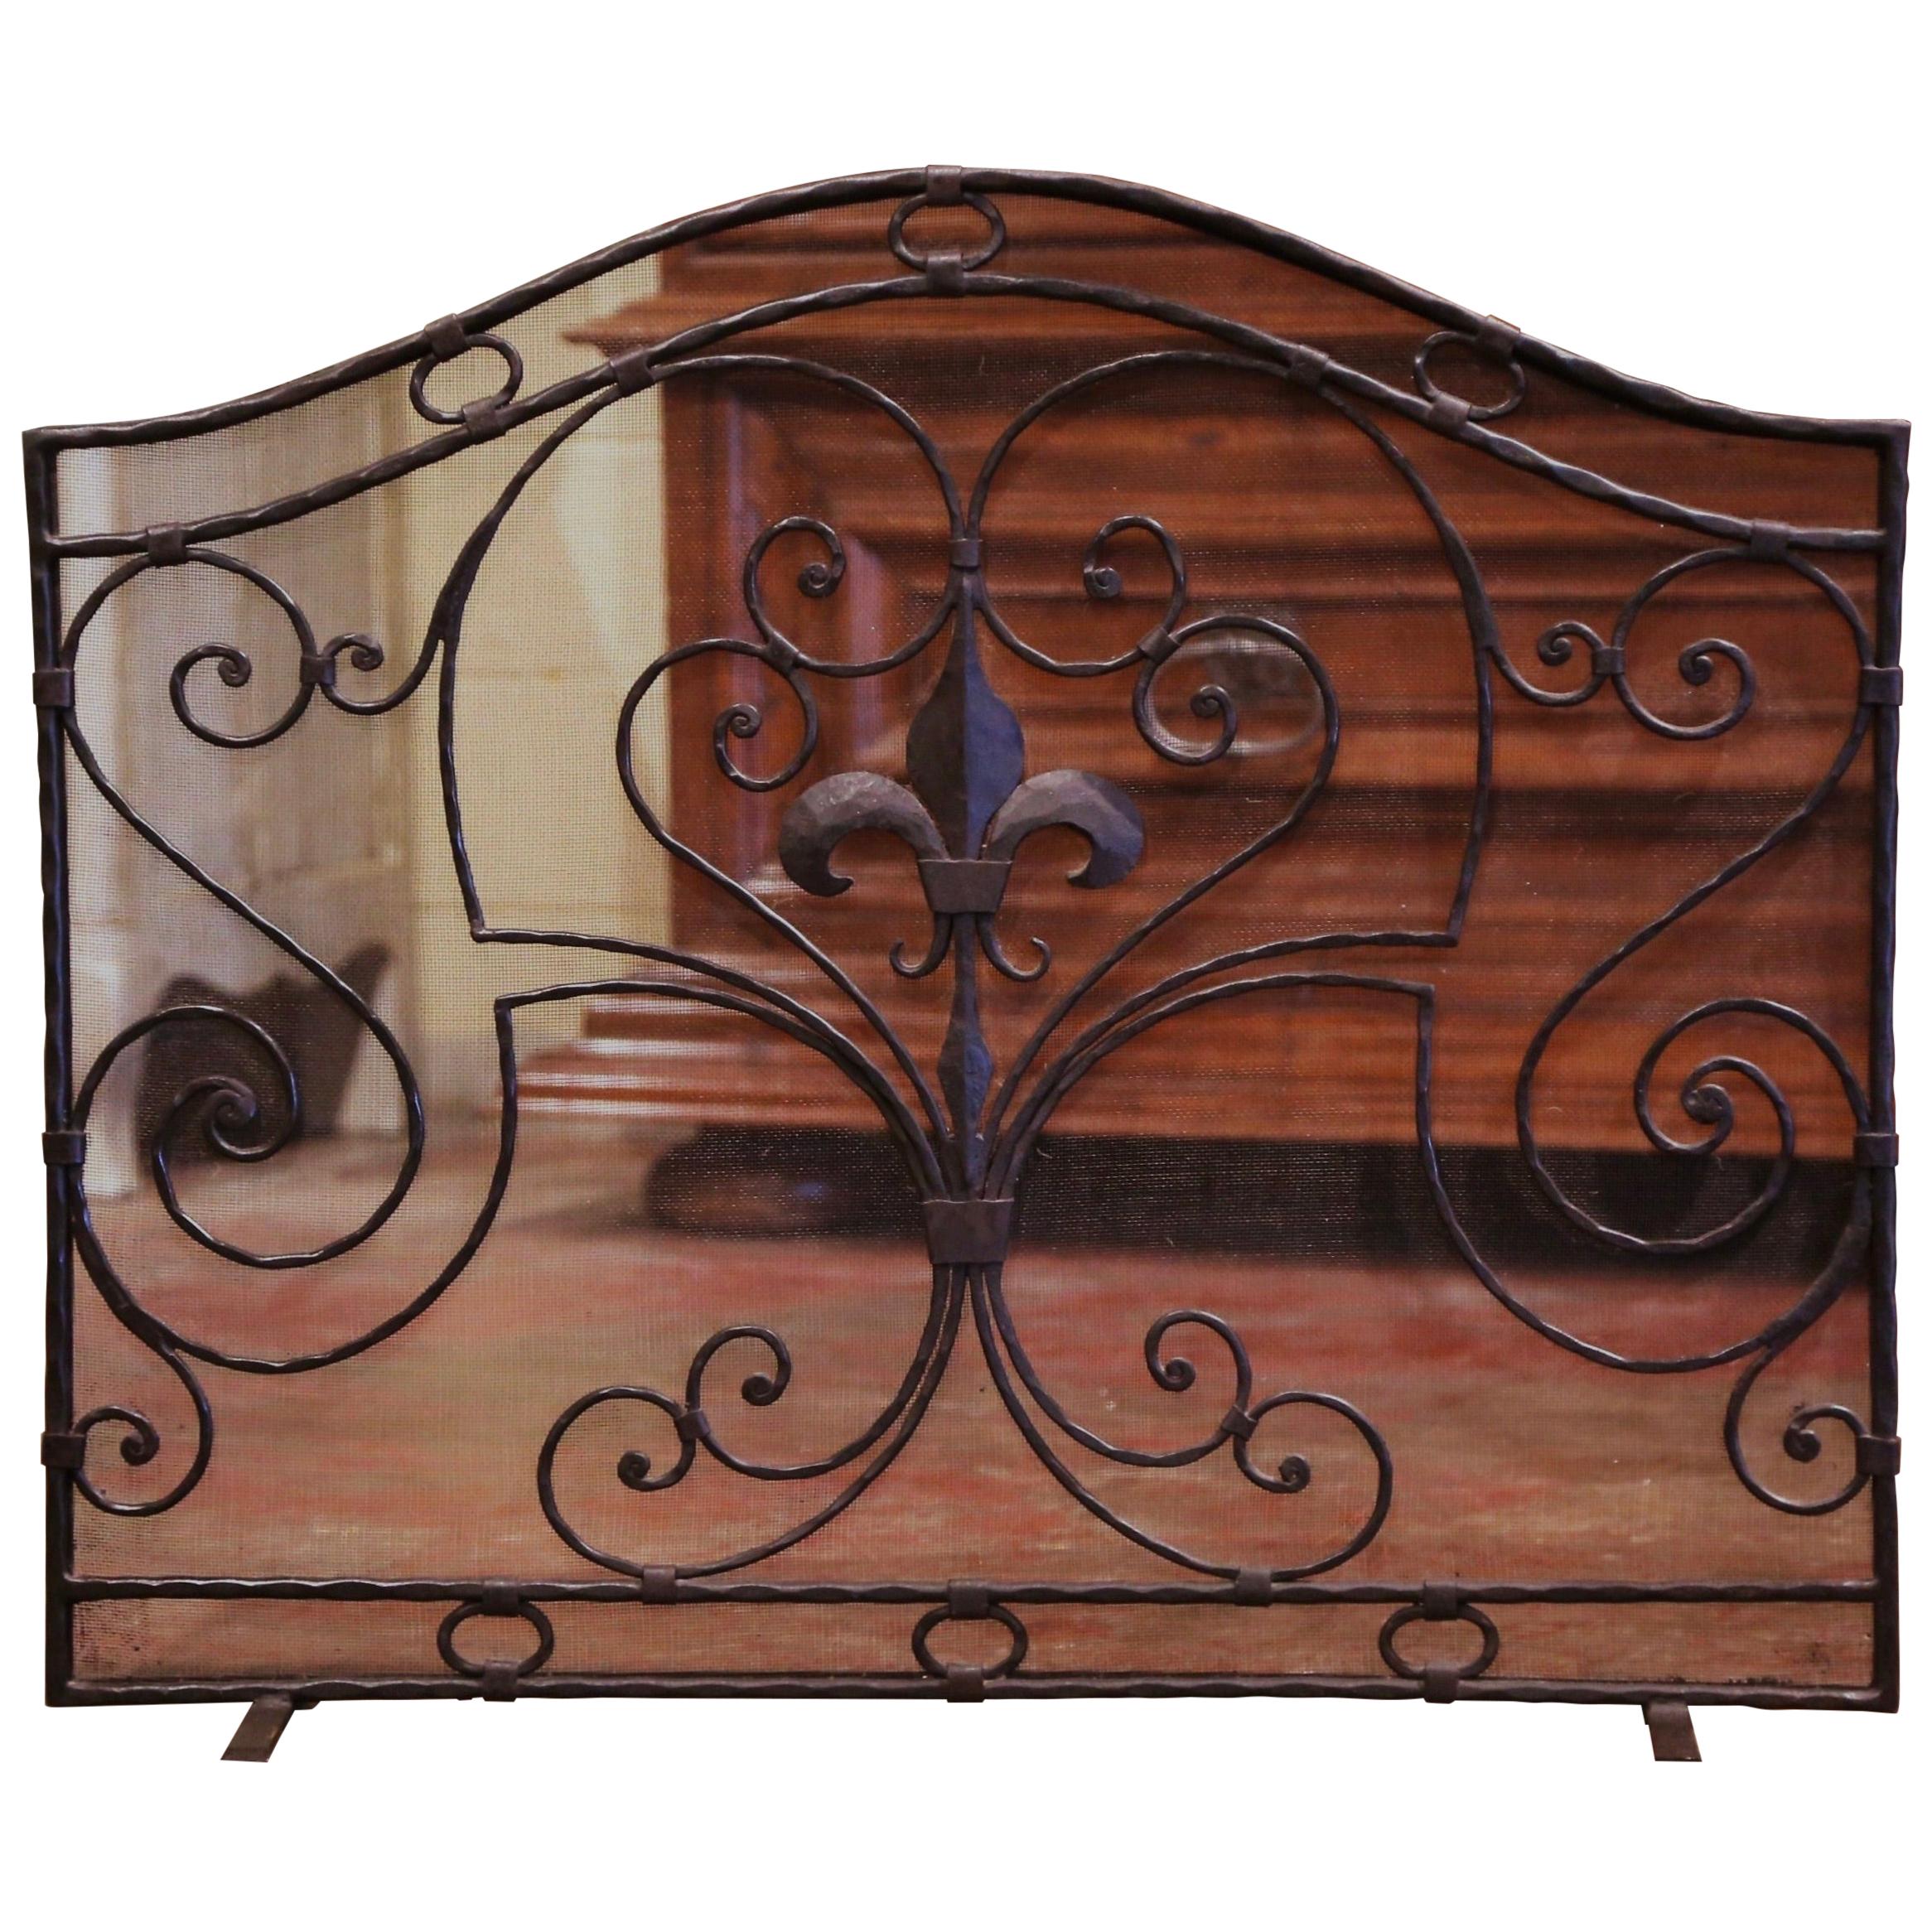 Mid-20th Century French Gothic Wrought Iron Fireplace Screen with Fleur-de-Lis